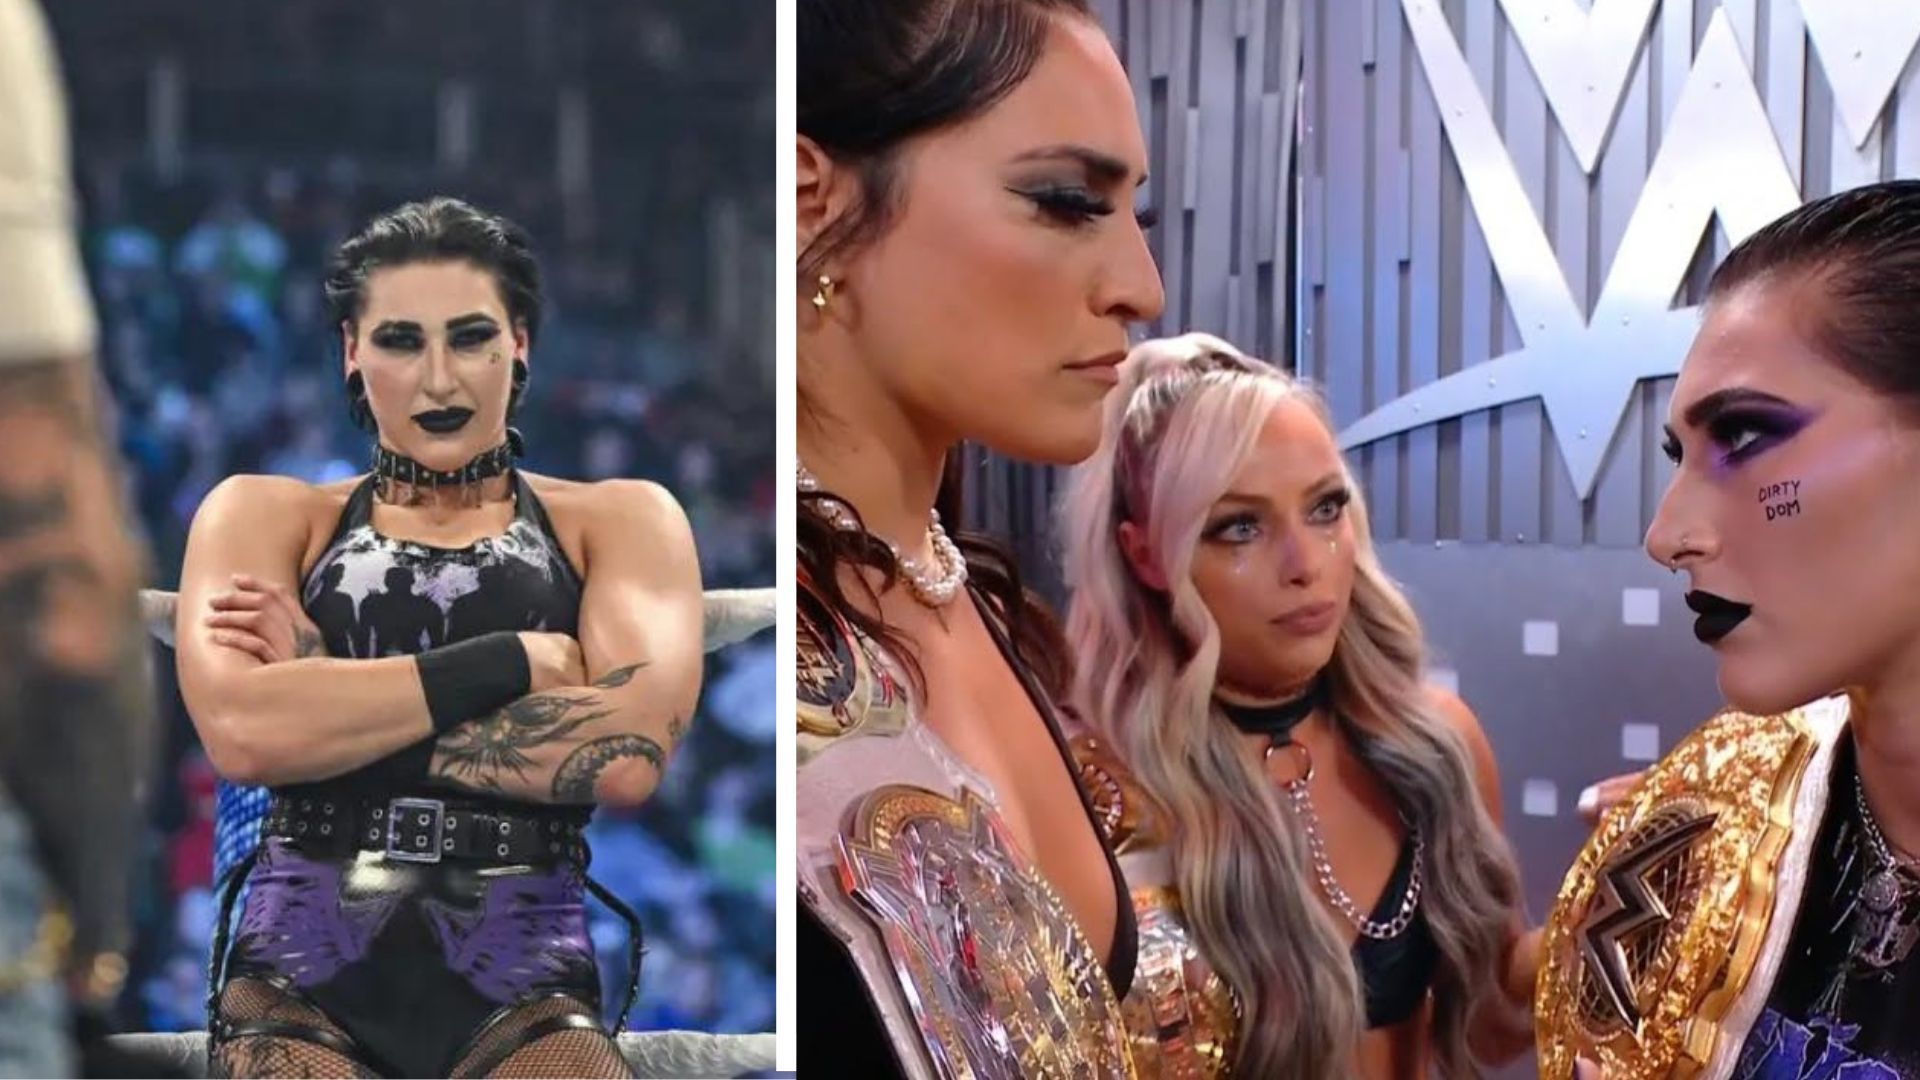 What could happen between Rhea Ripley and Raquel Rodriguez in their brewing feud?